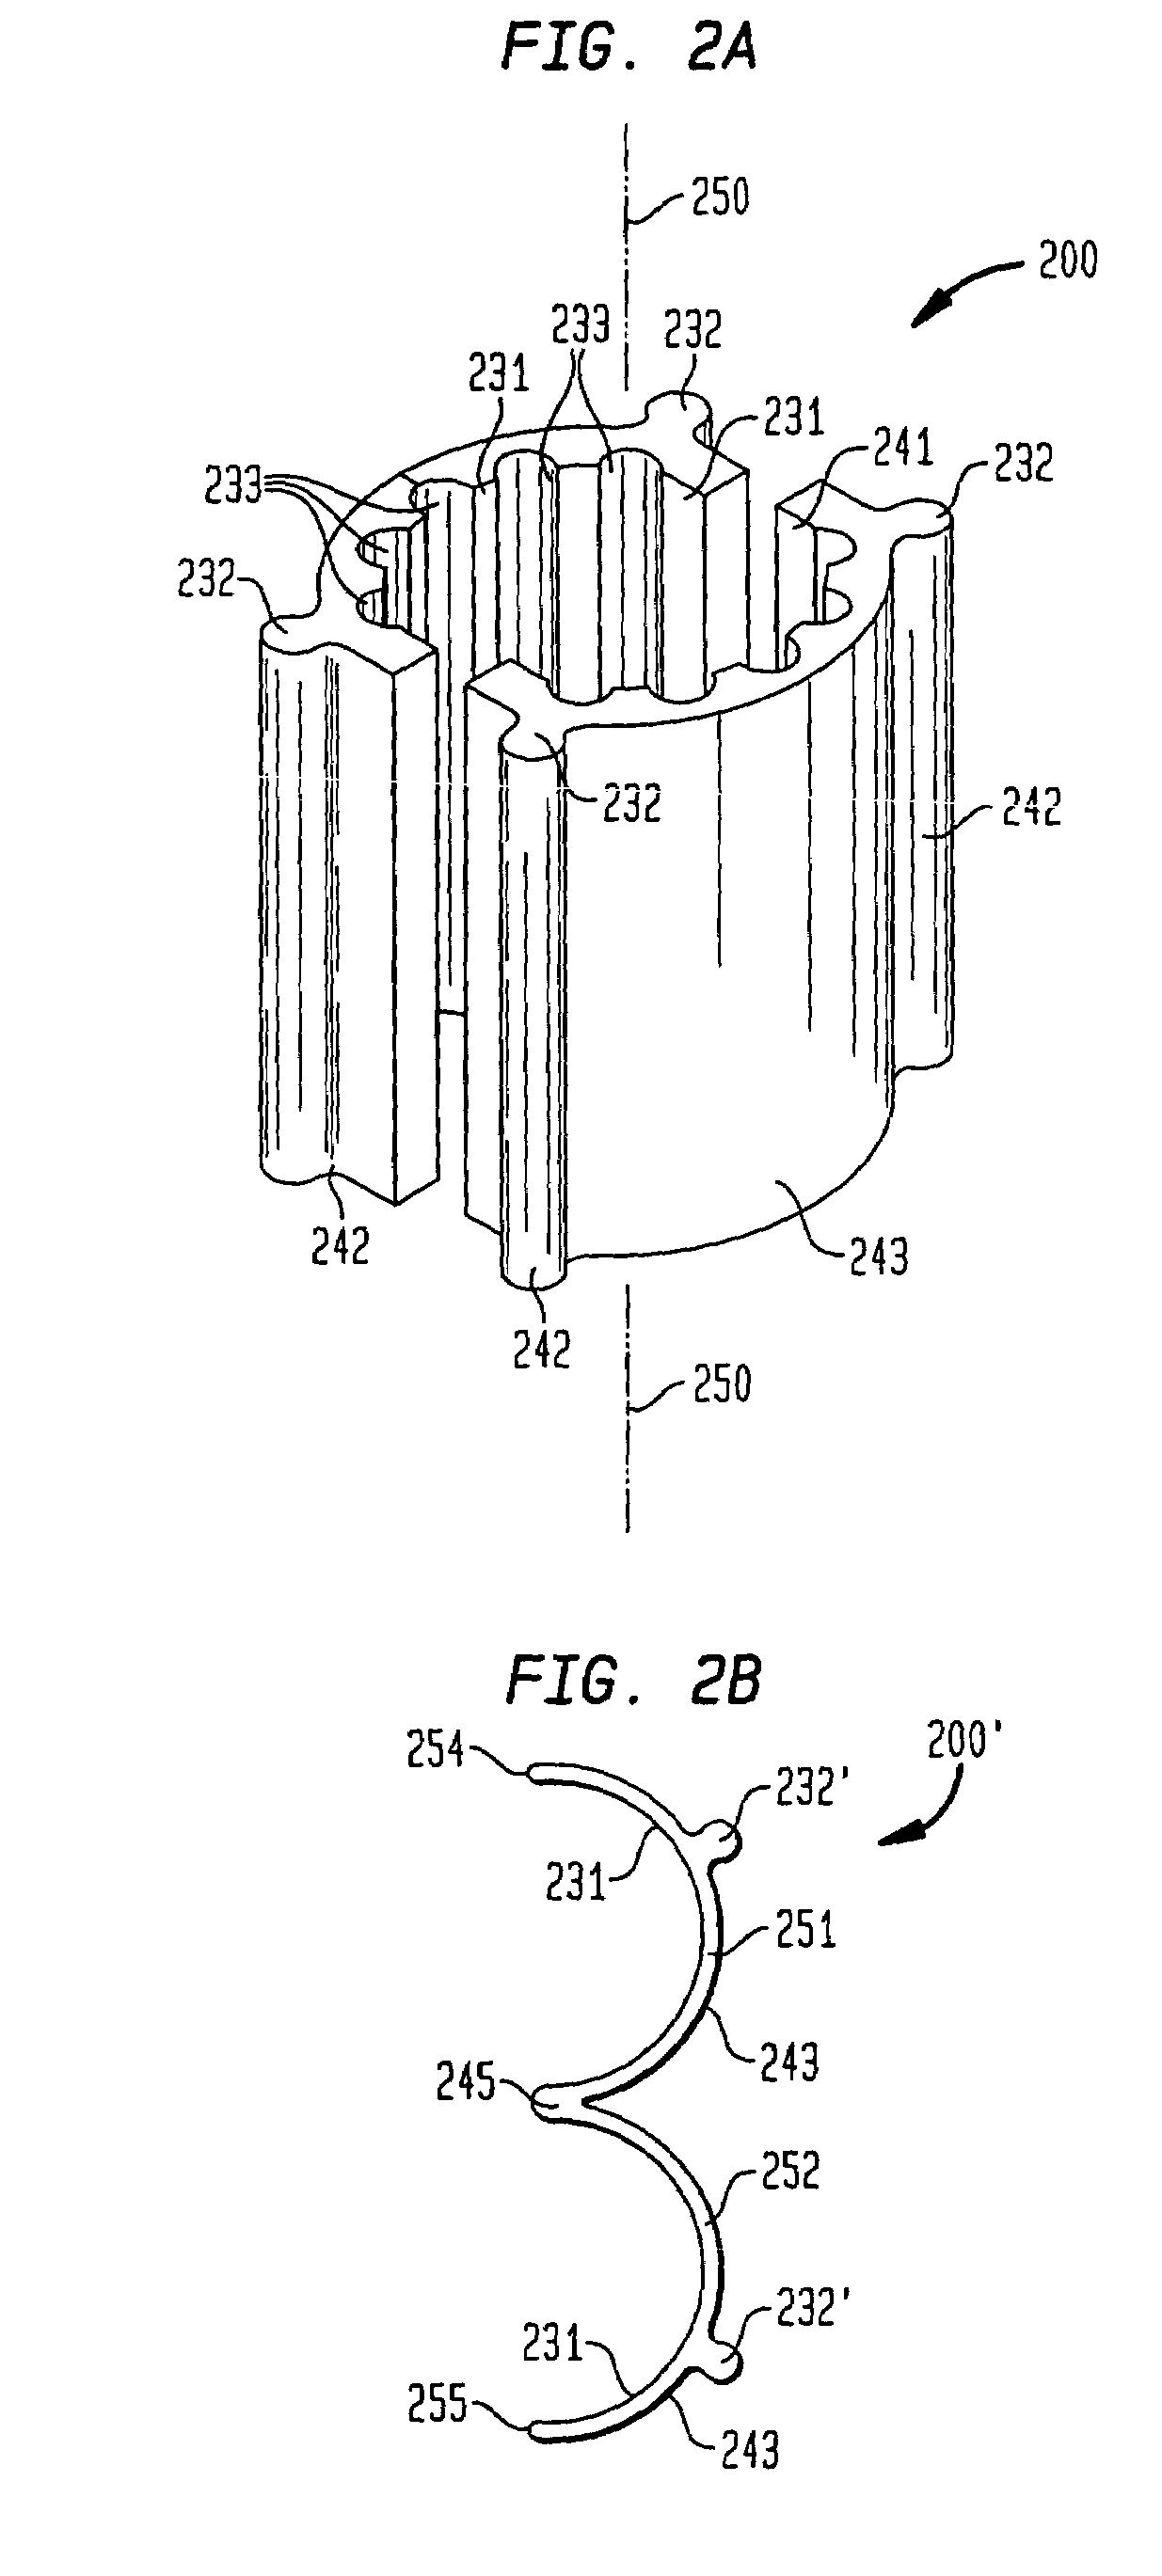 Mounting bracket for electronic device having dimensional inserts